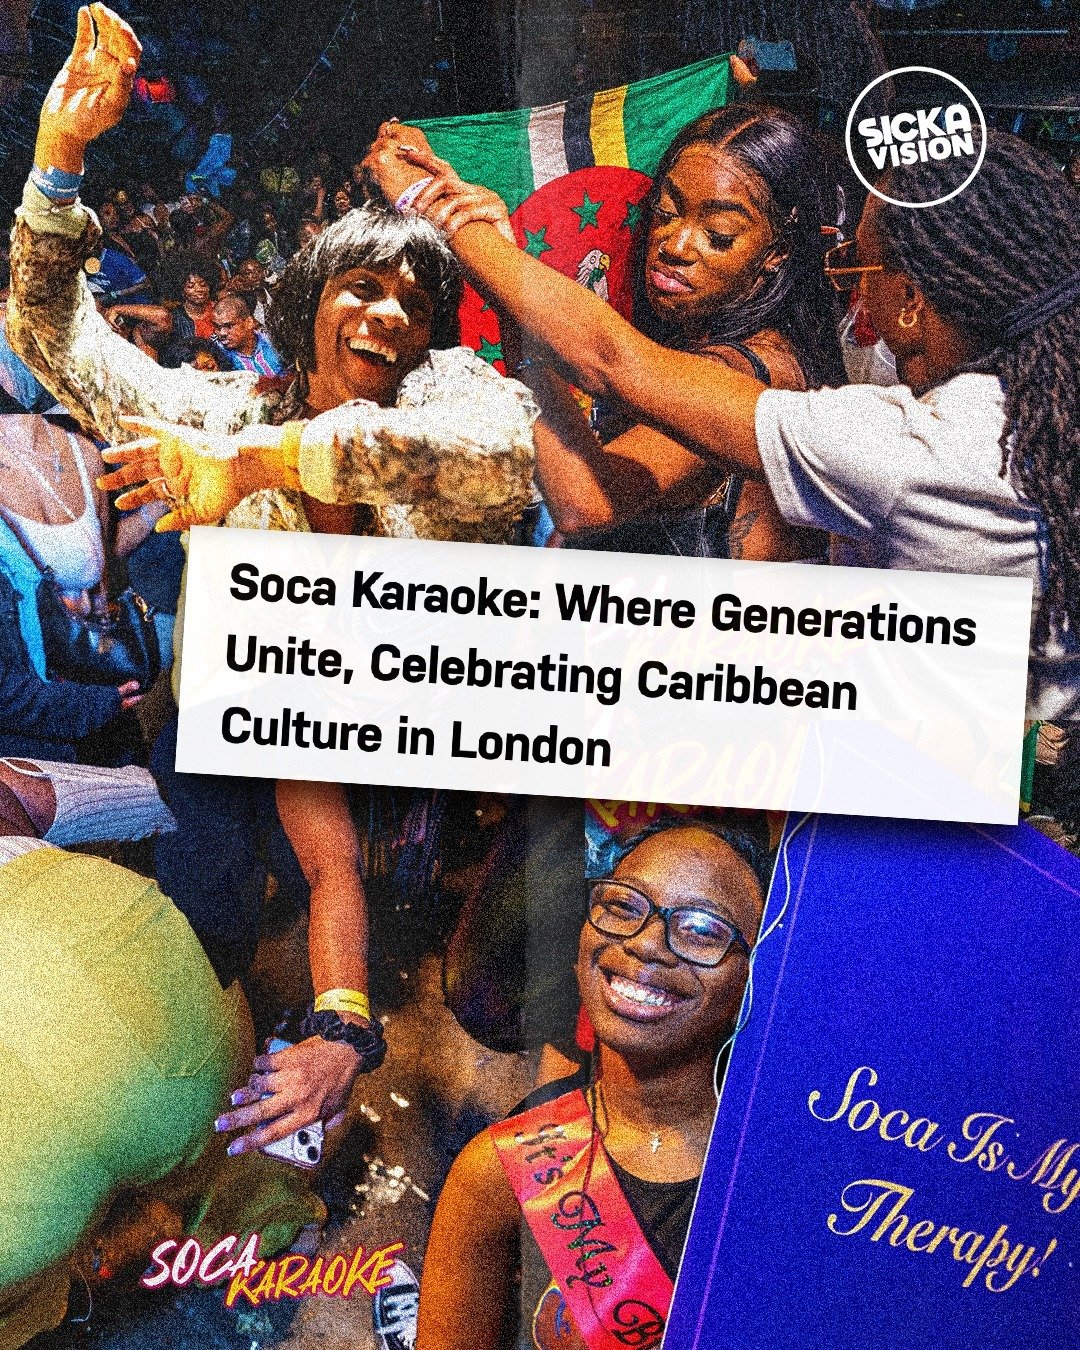 Soca Karaoke: Where Generations Unite, Celebrating Caribbean Culture in London (@ljsnevents)

💬 Written by @jodieonline - &quot;I never thought I was a karaoke person, that was until I had the pleasure of attending Soca Karaoke.&quot;

🍗 🫂 The fou